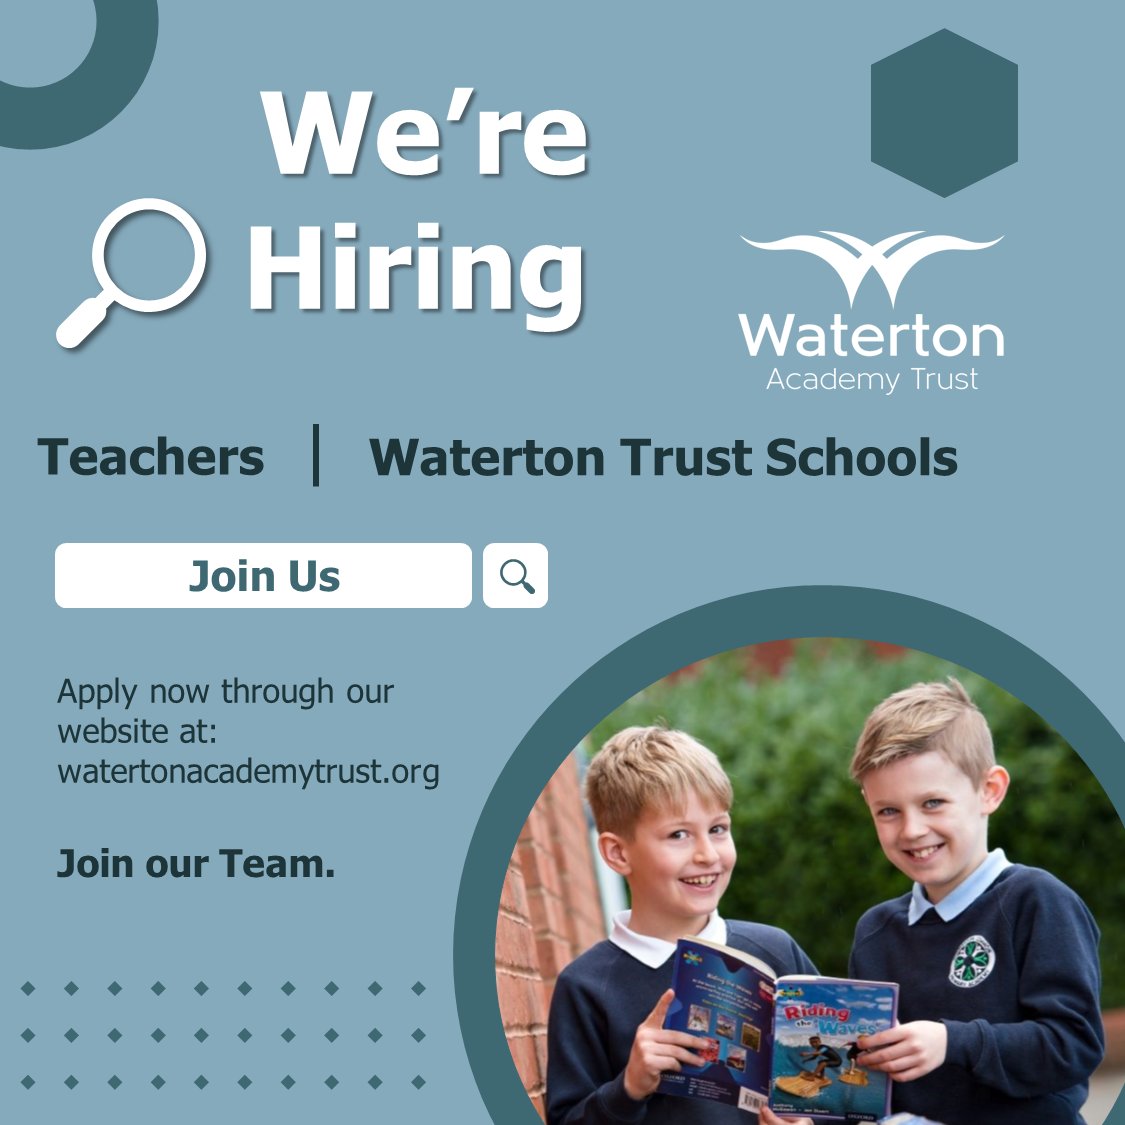 📚Passionate about teaching?
🏫We're seeking inspirational and ambitious teachers
🌱 Grow your career with Waterton Academy Trust
🤝Become a part of our journey!
🔗For more information visit: watertonacademytrust.org/recruitment/
#EducationCareers #TeachingJobs